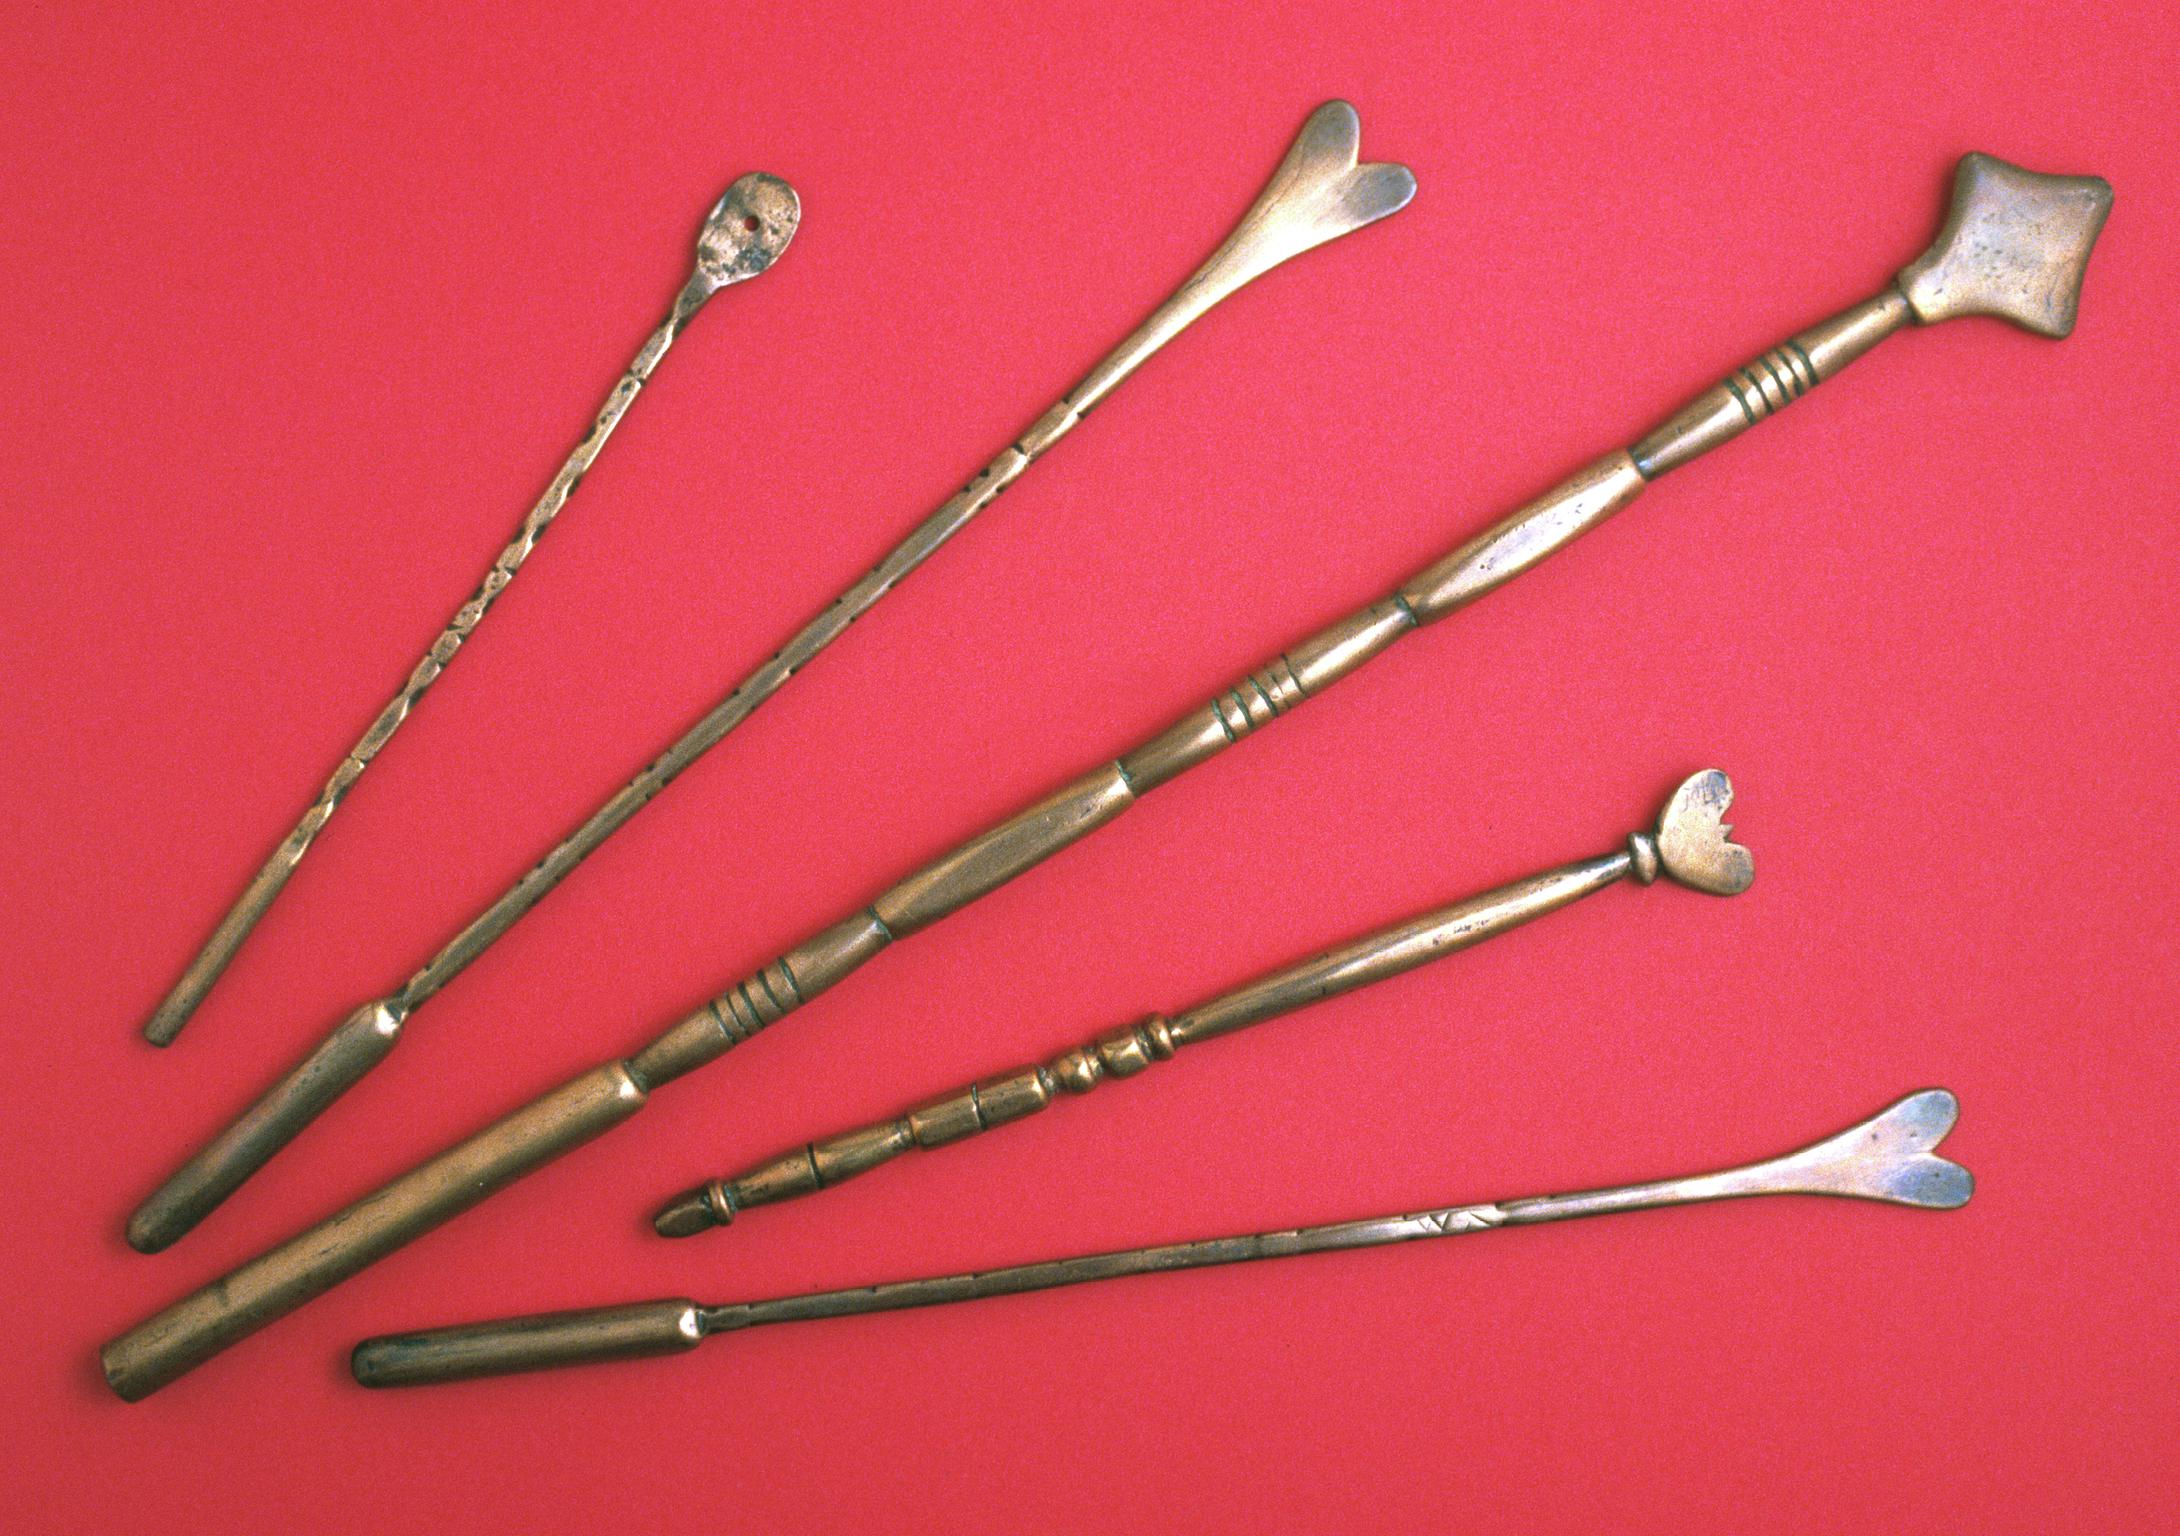 Goffering irons, 18th or 19th century